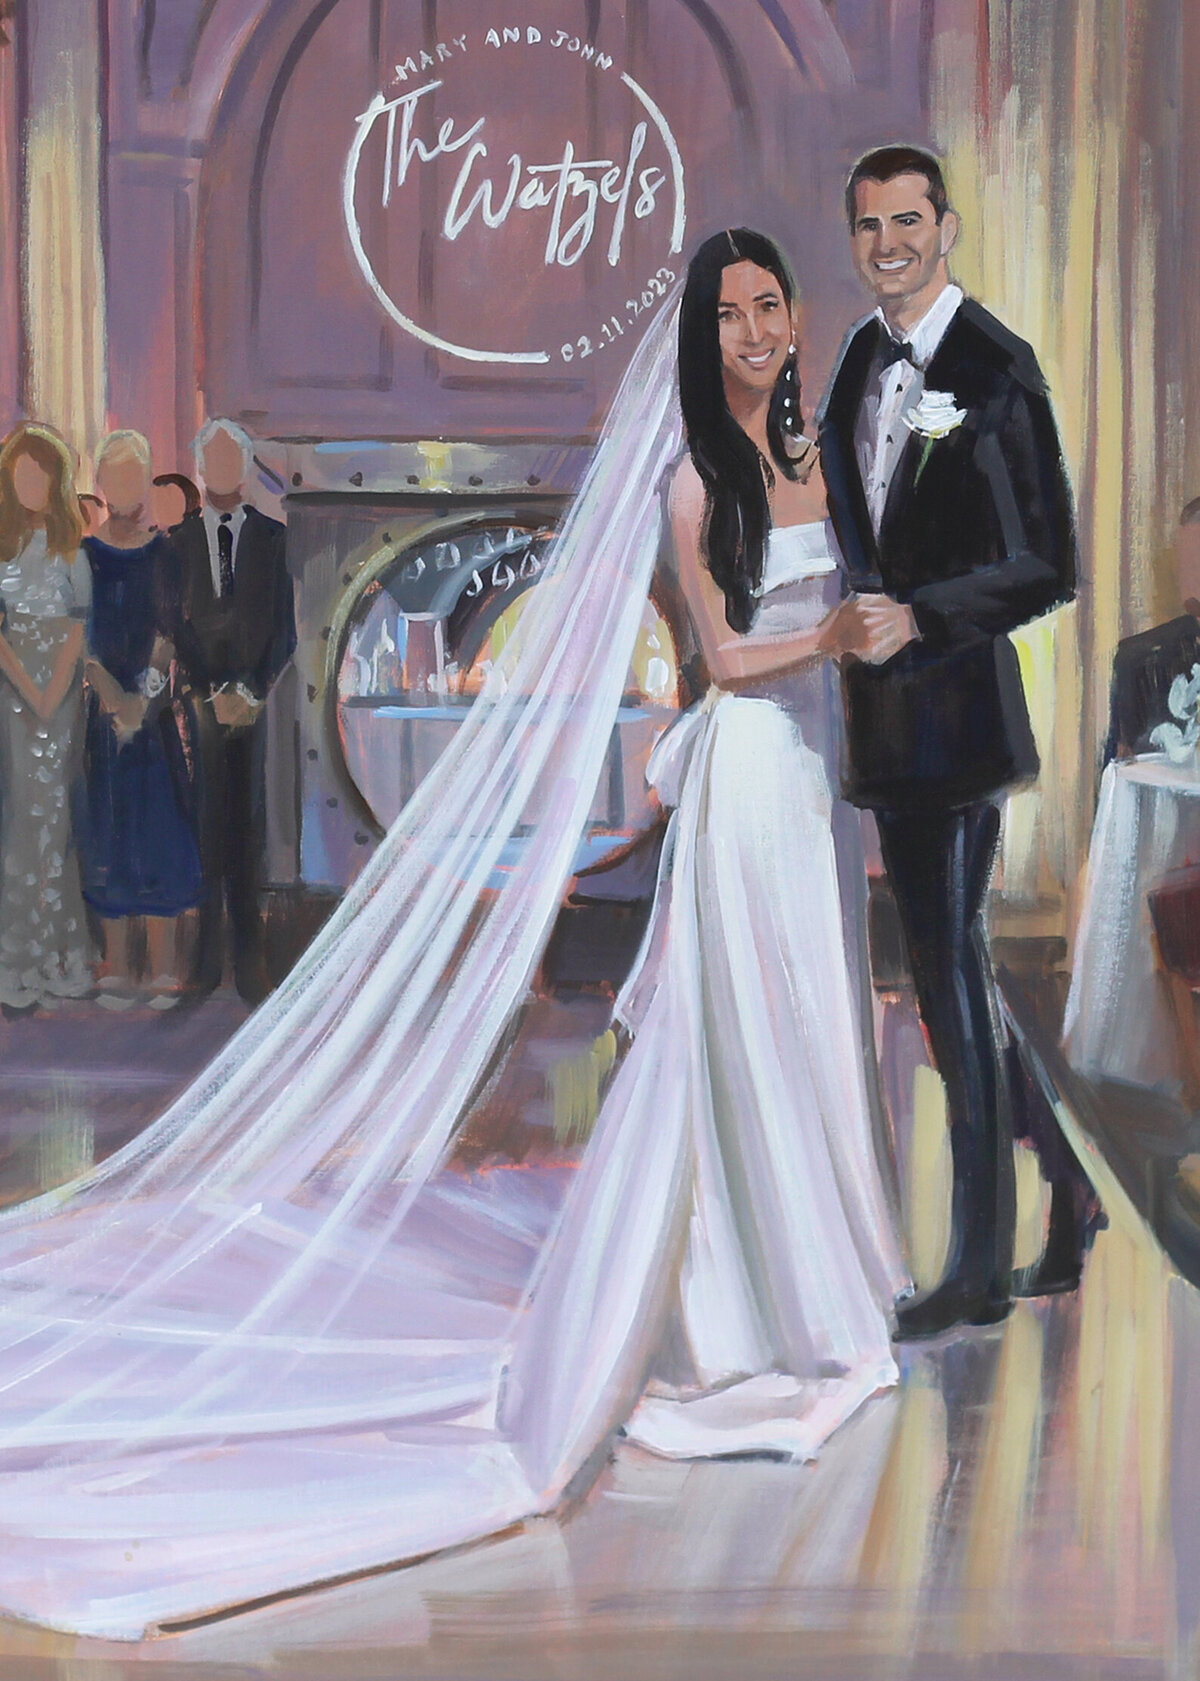 Live Wedding Painter, Ben Keys, close up of live wedding painting created at The Treasury on the Plaza in St. Augustine, Florida